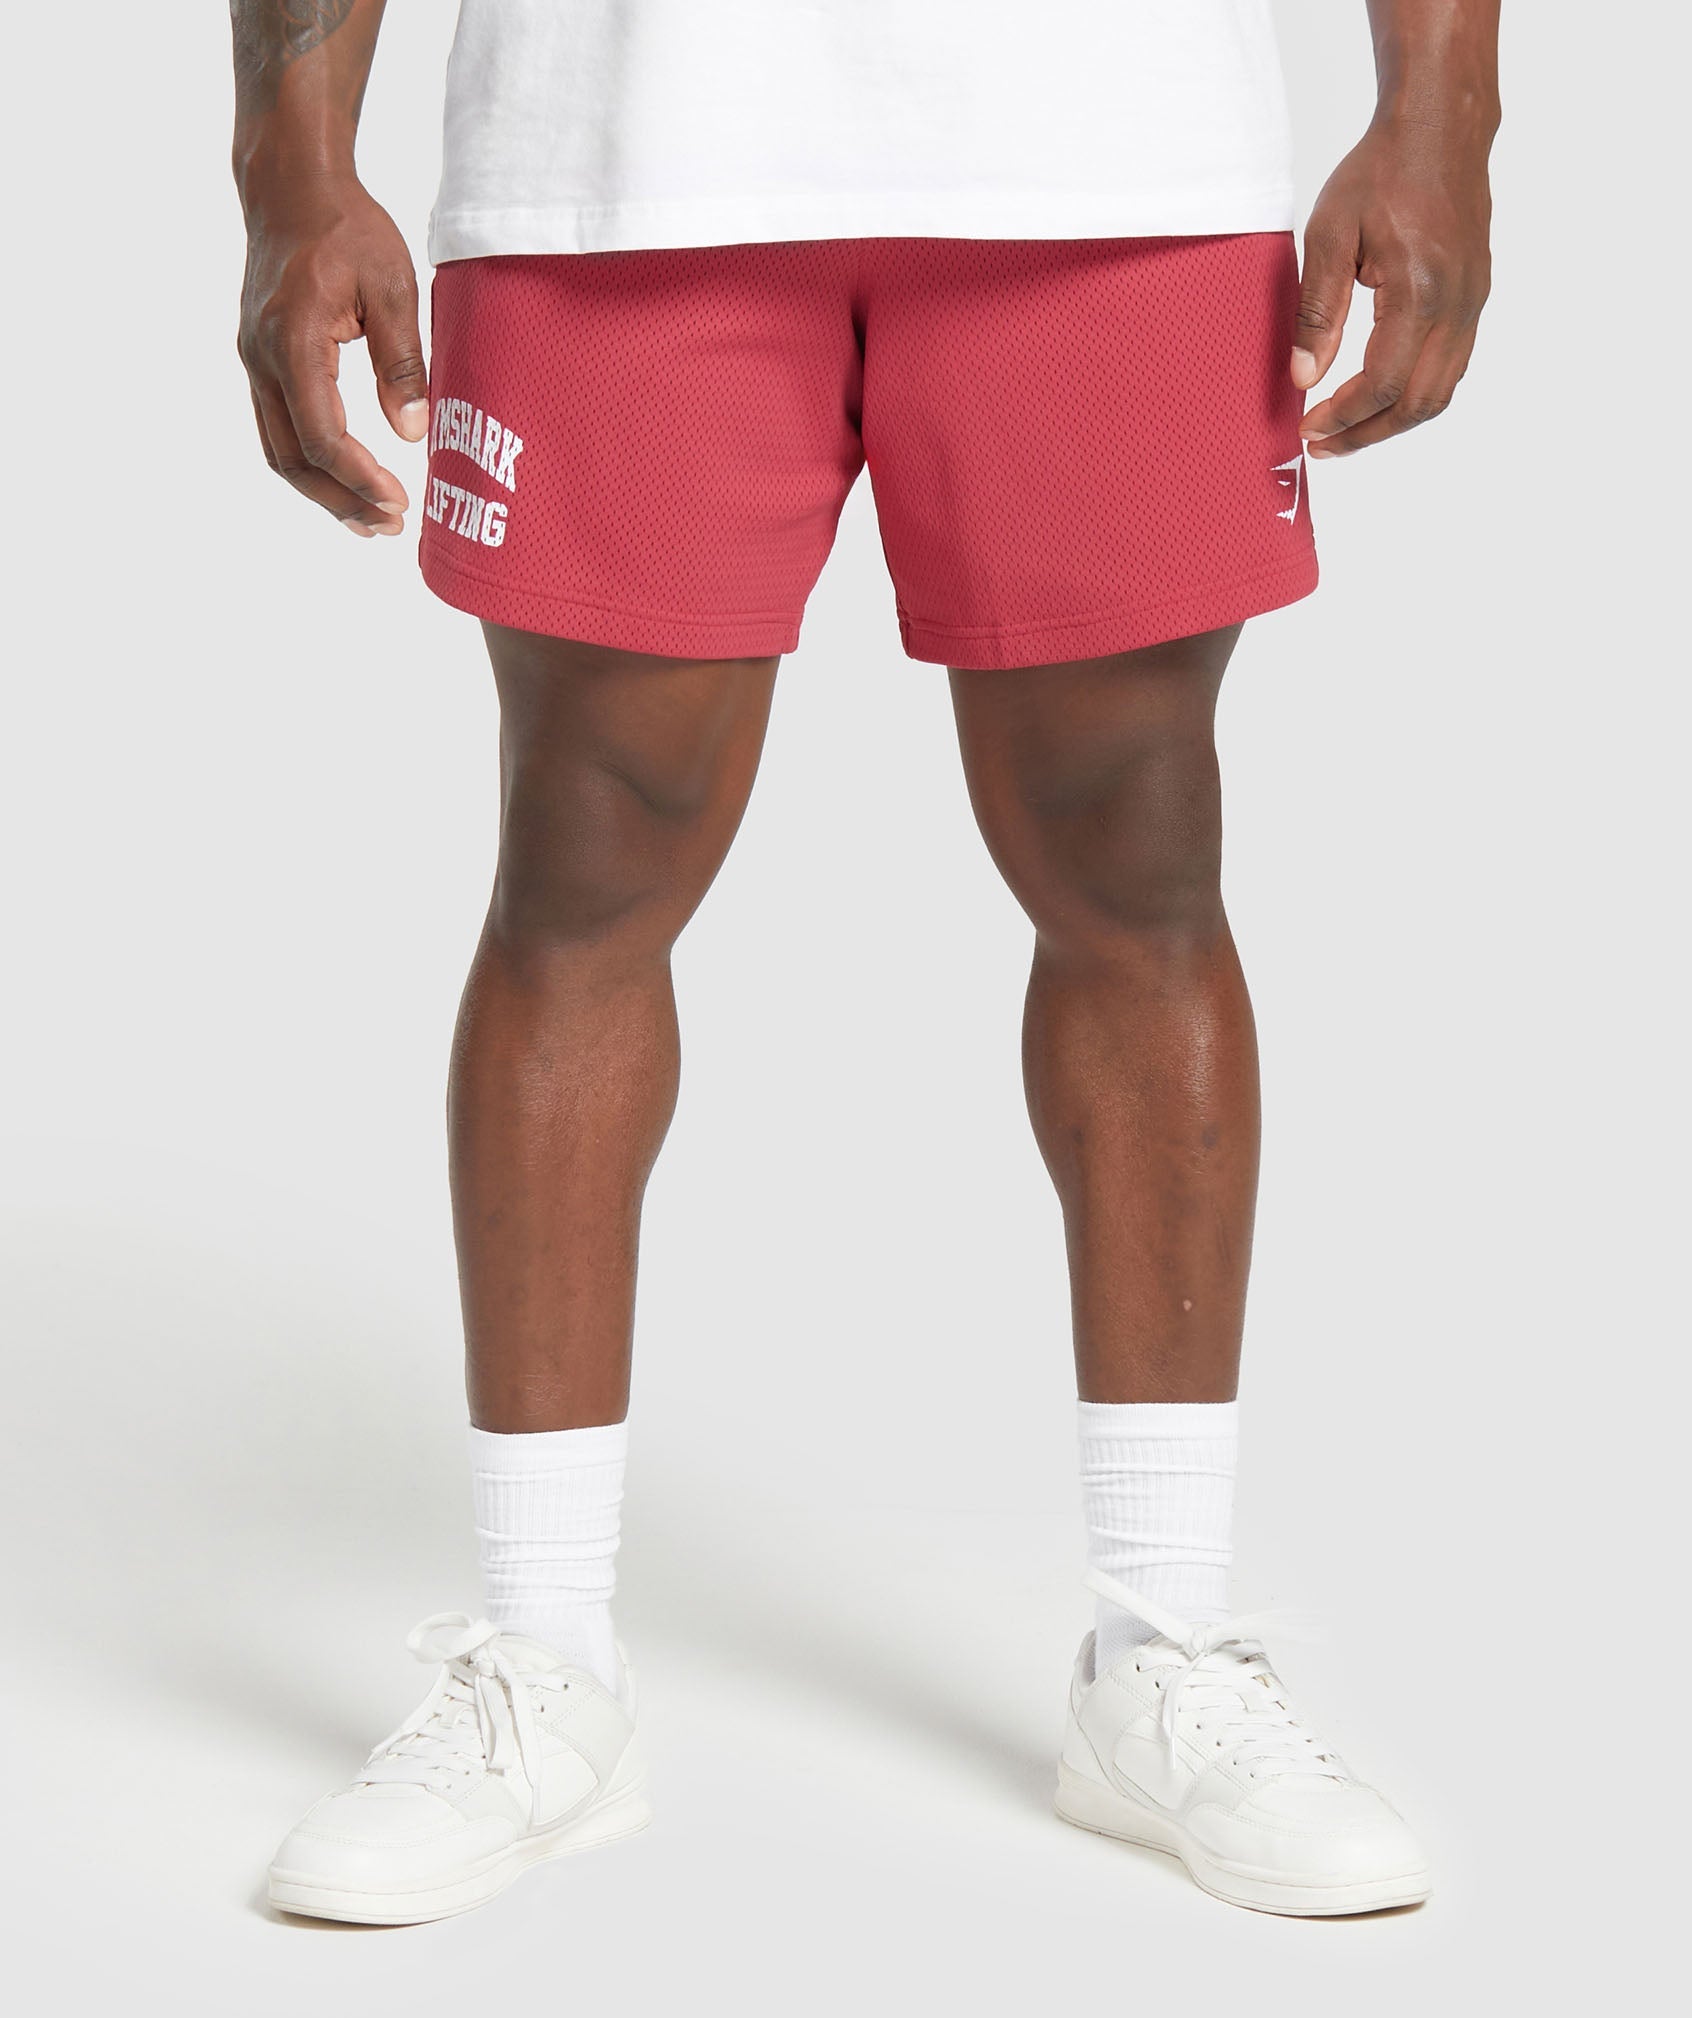 Lifting Mesh 7" Shorts in Vintage Pink - view 1